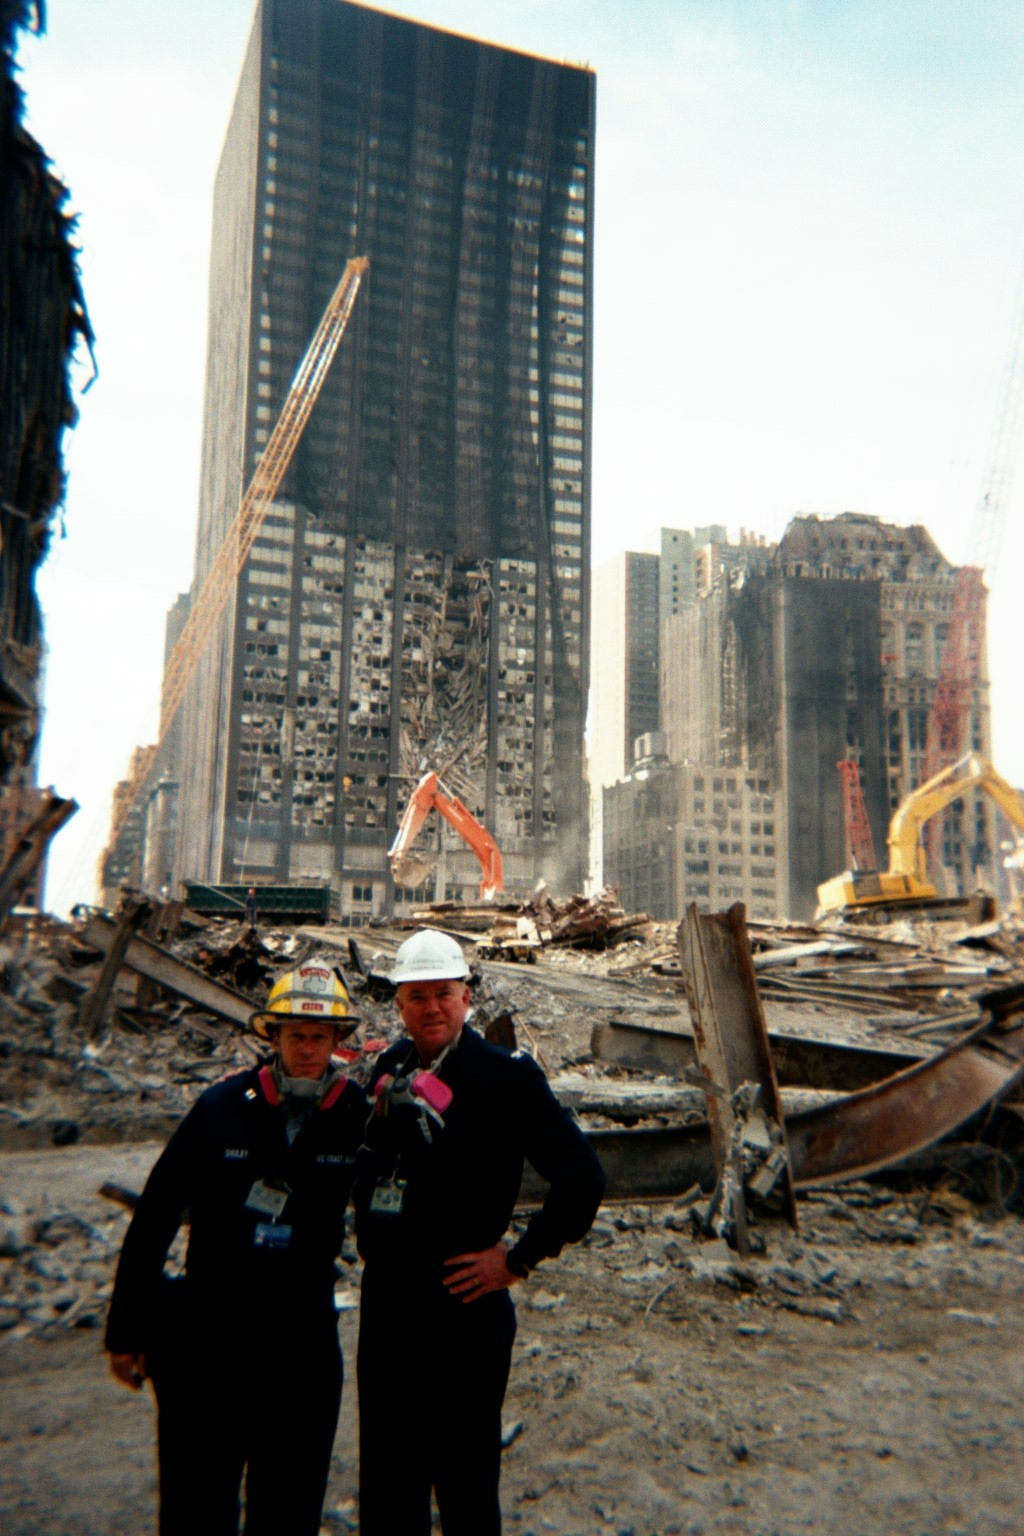 Two Coast Guard chaplains at Ground Zero assisting in the response effort. (U.S. Coast Guard)